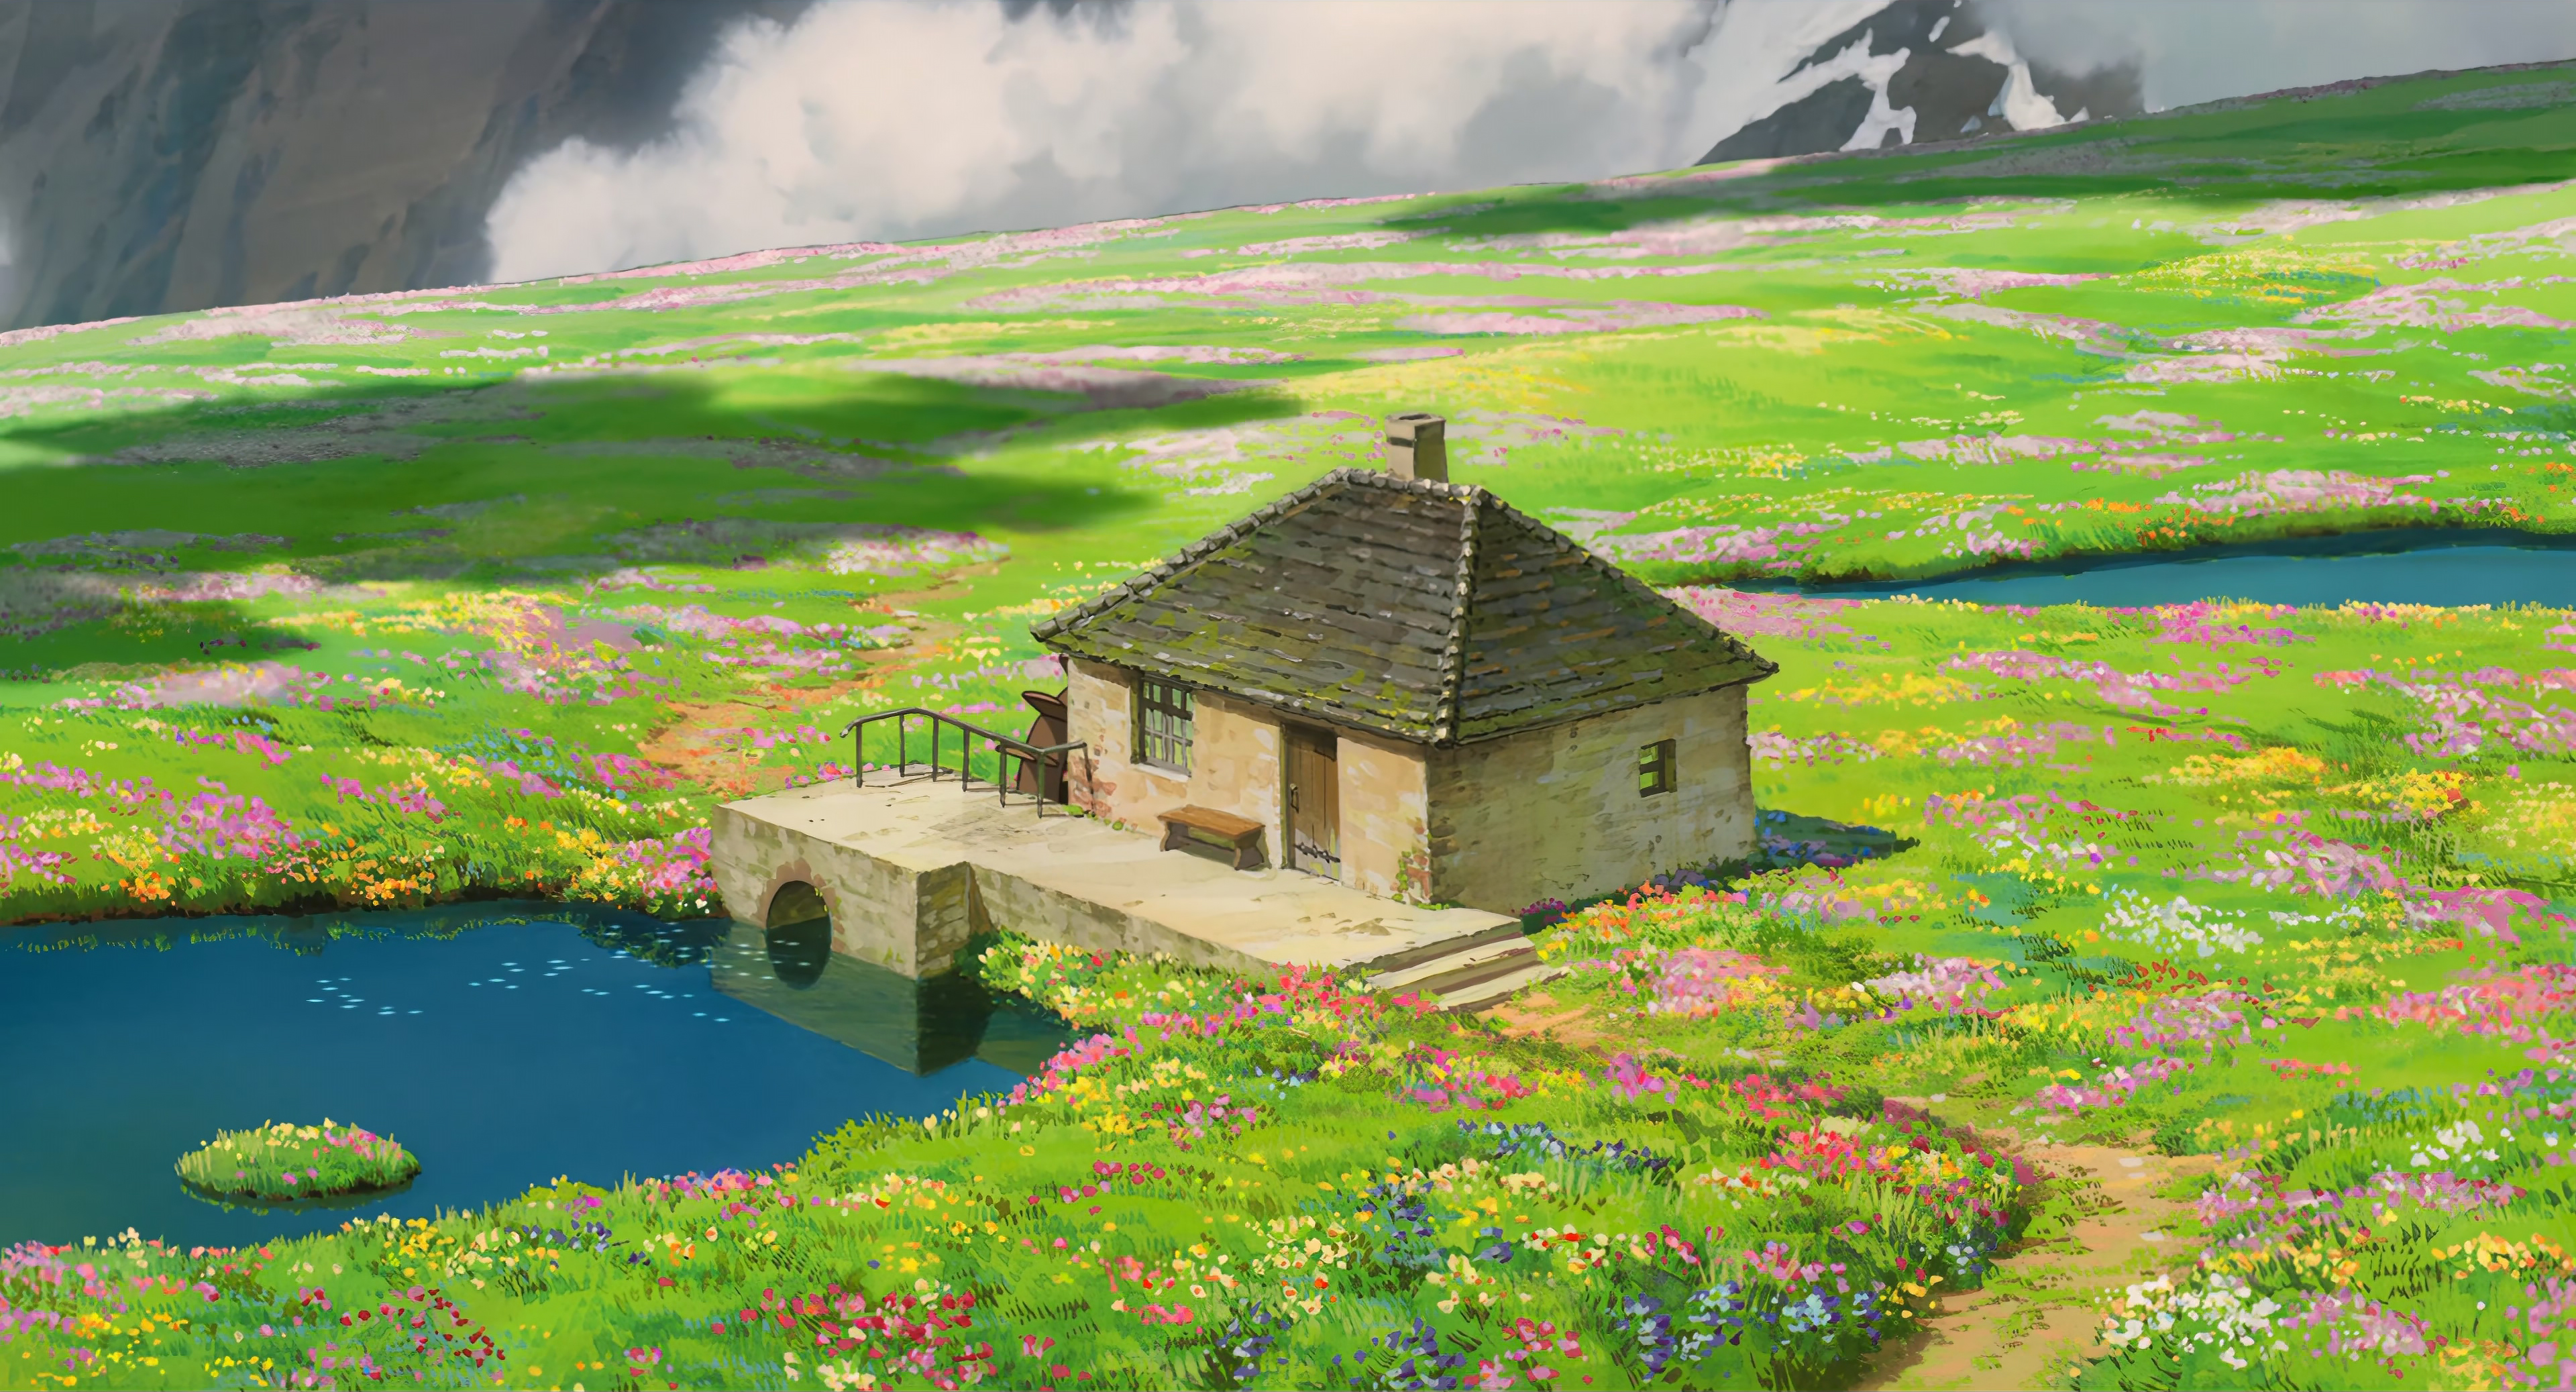 Anime 3840x2075 Howl's Moving Castle Studio Ghibli anime field house water reflection clouds plants grass steps sunlight flowers